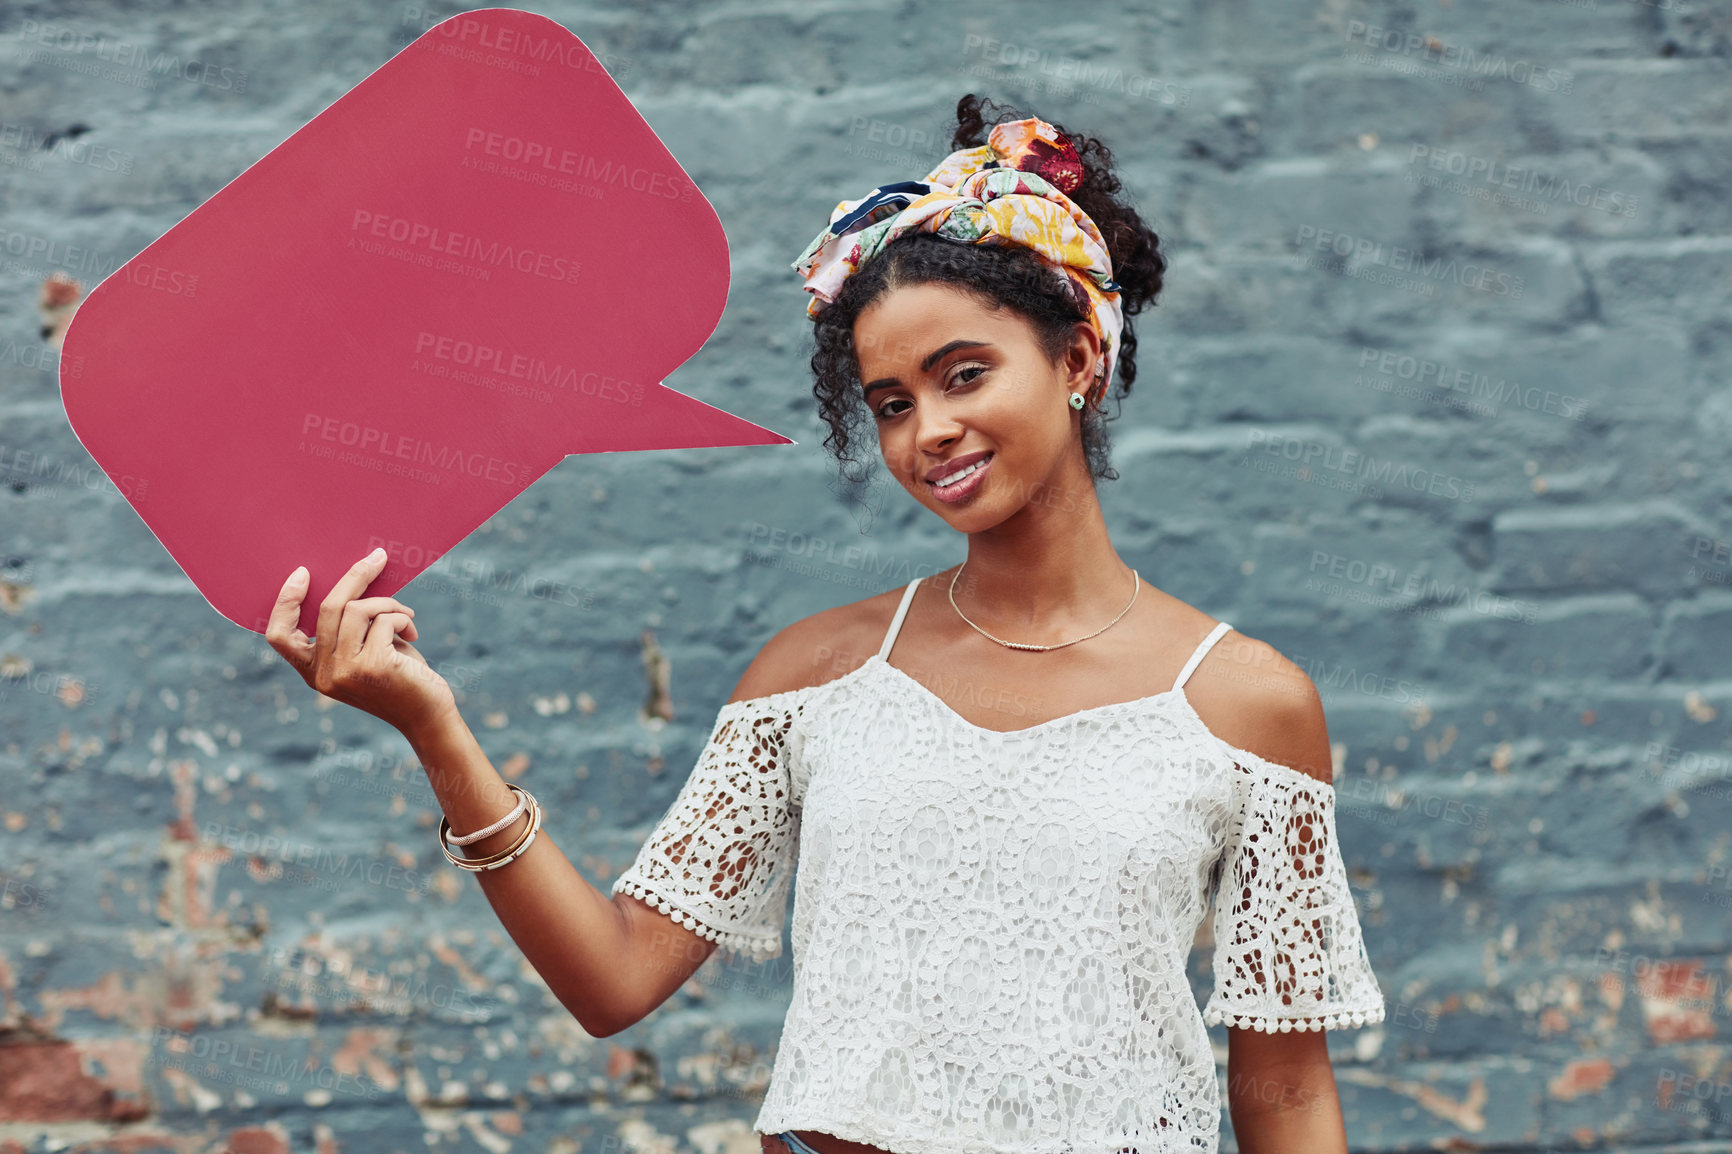 Buy stock photo Cropped shot of an attractive young woman holding a speech bubble against a brick wall outside